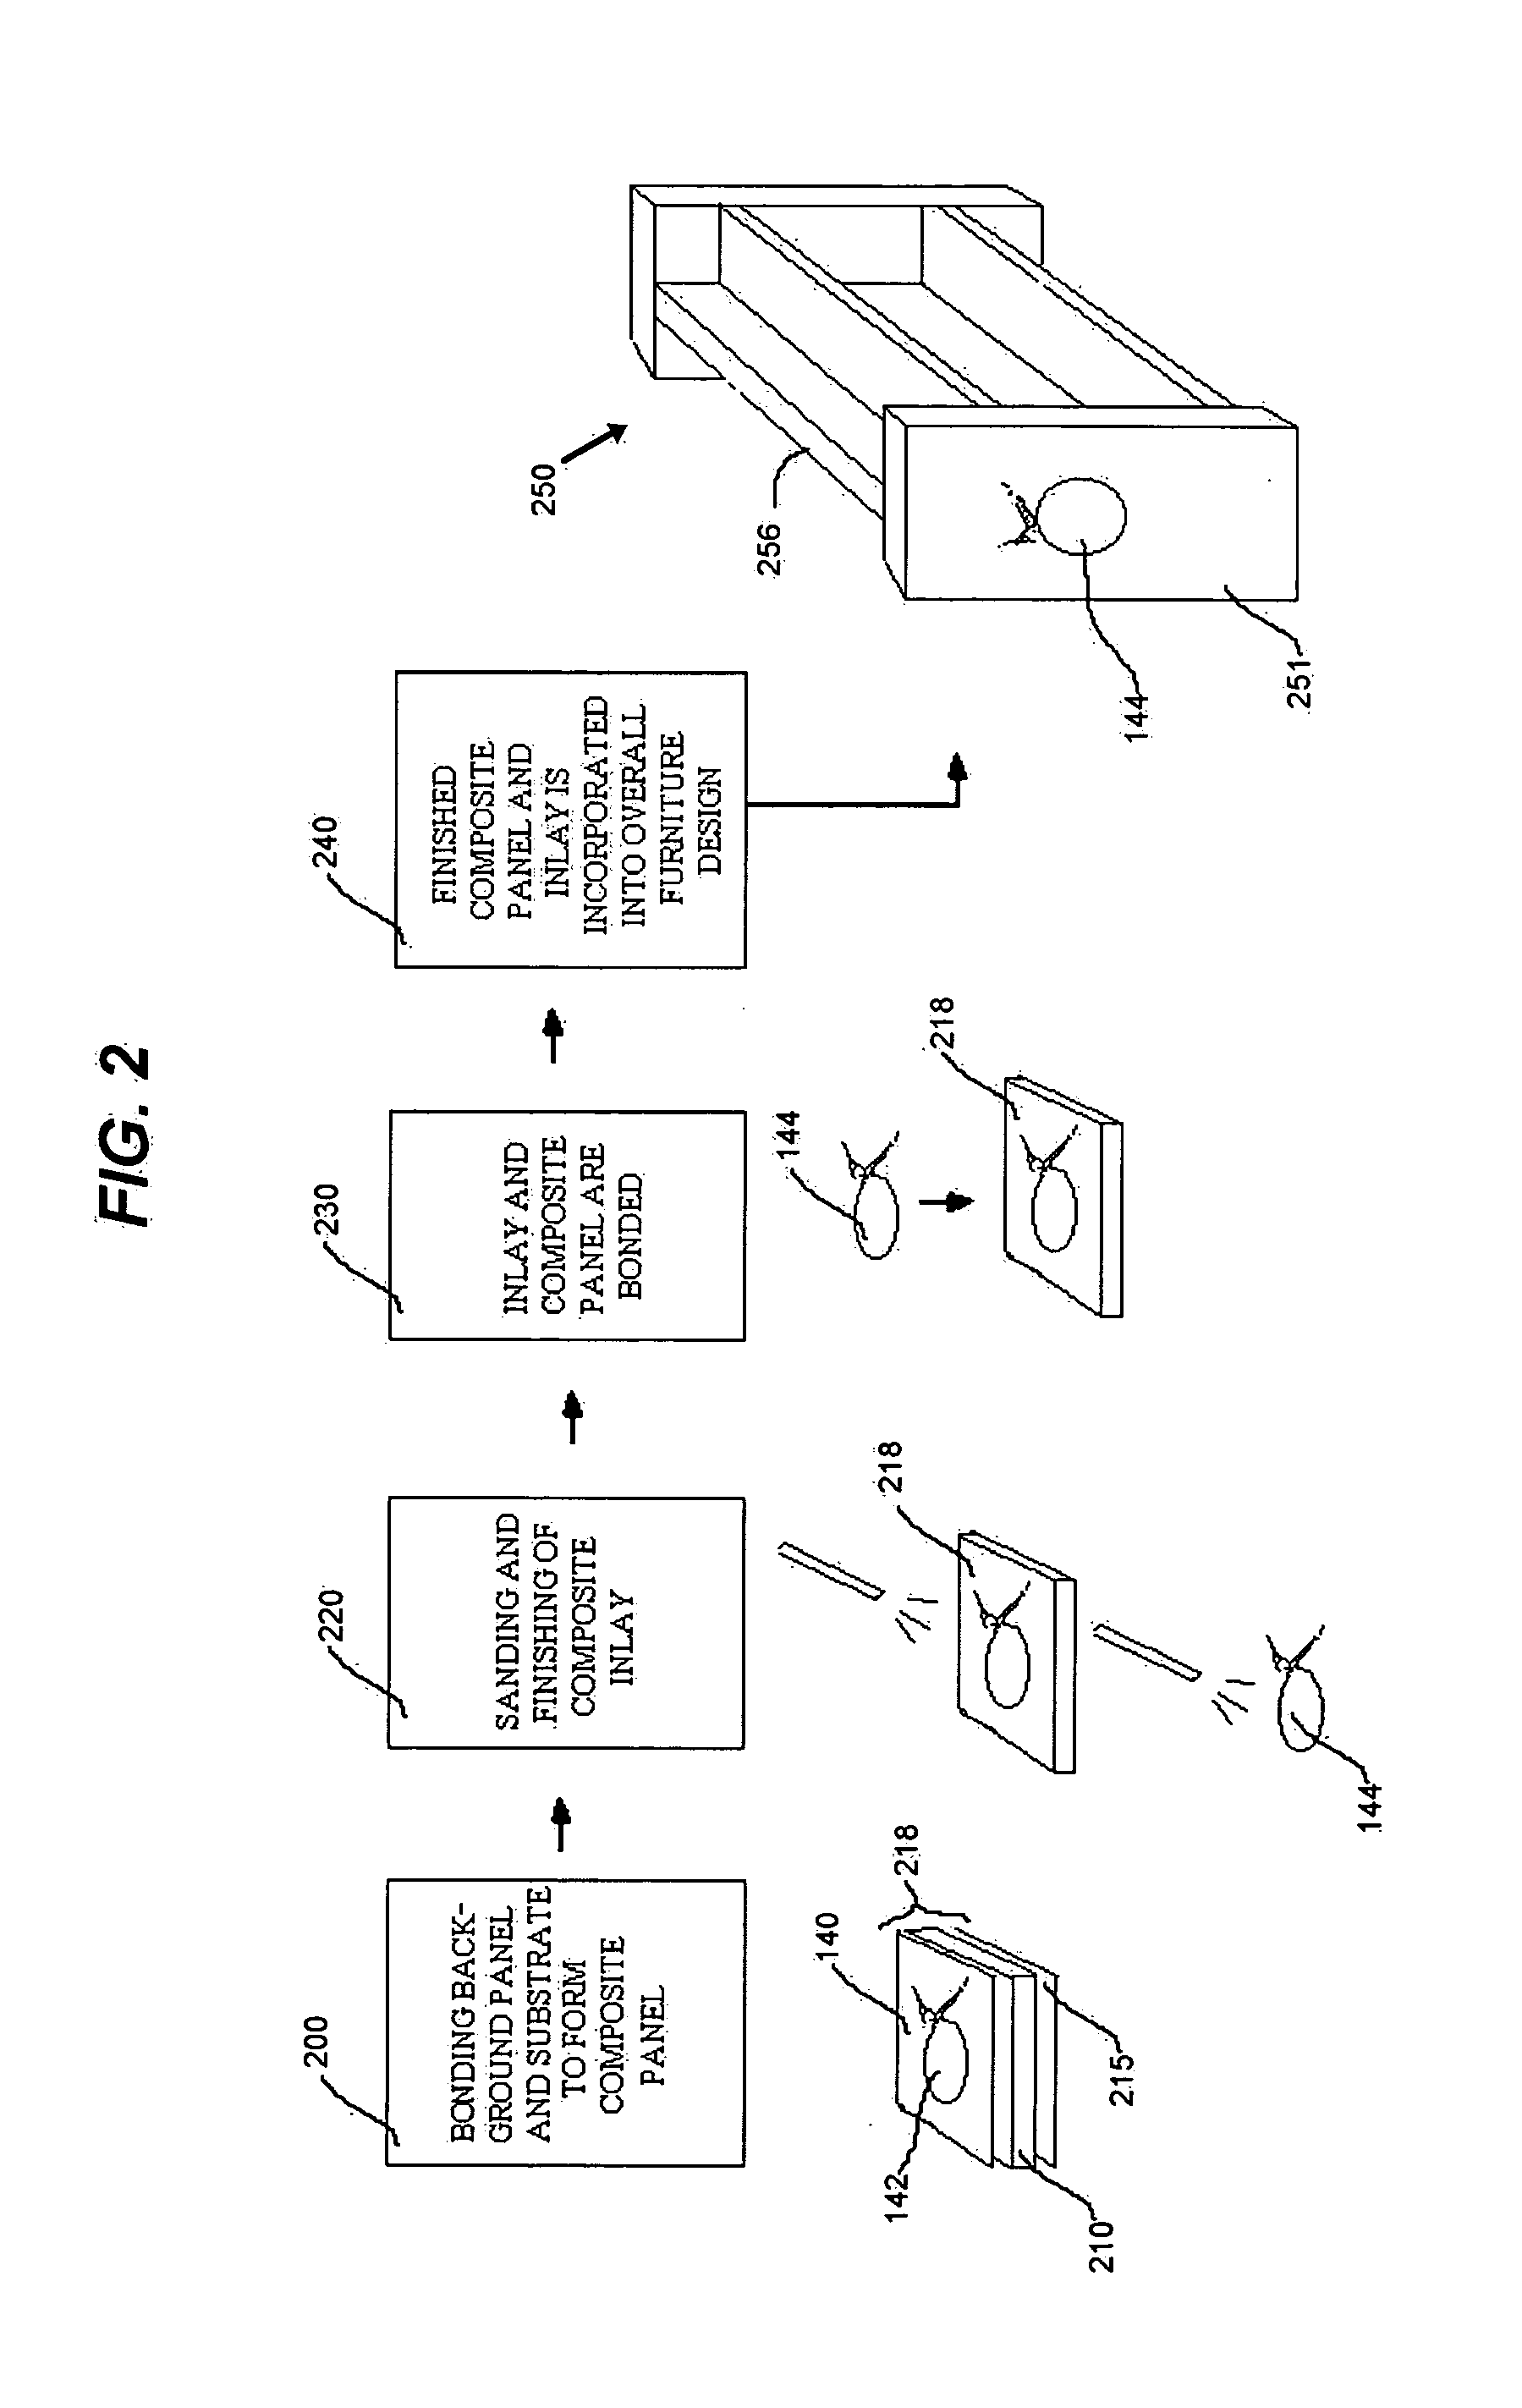 System for manufacturing an inlay panel using a laser